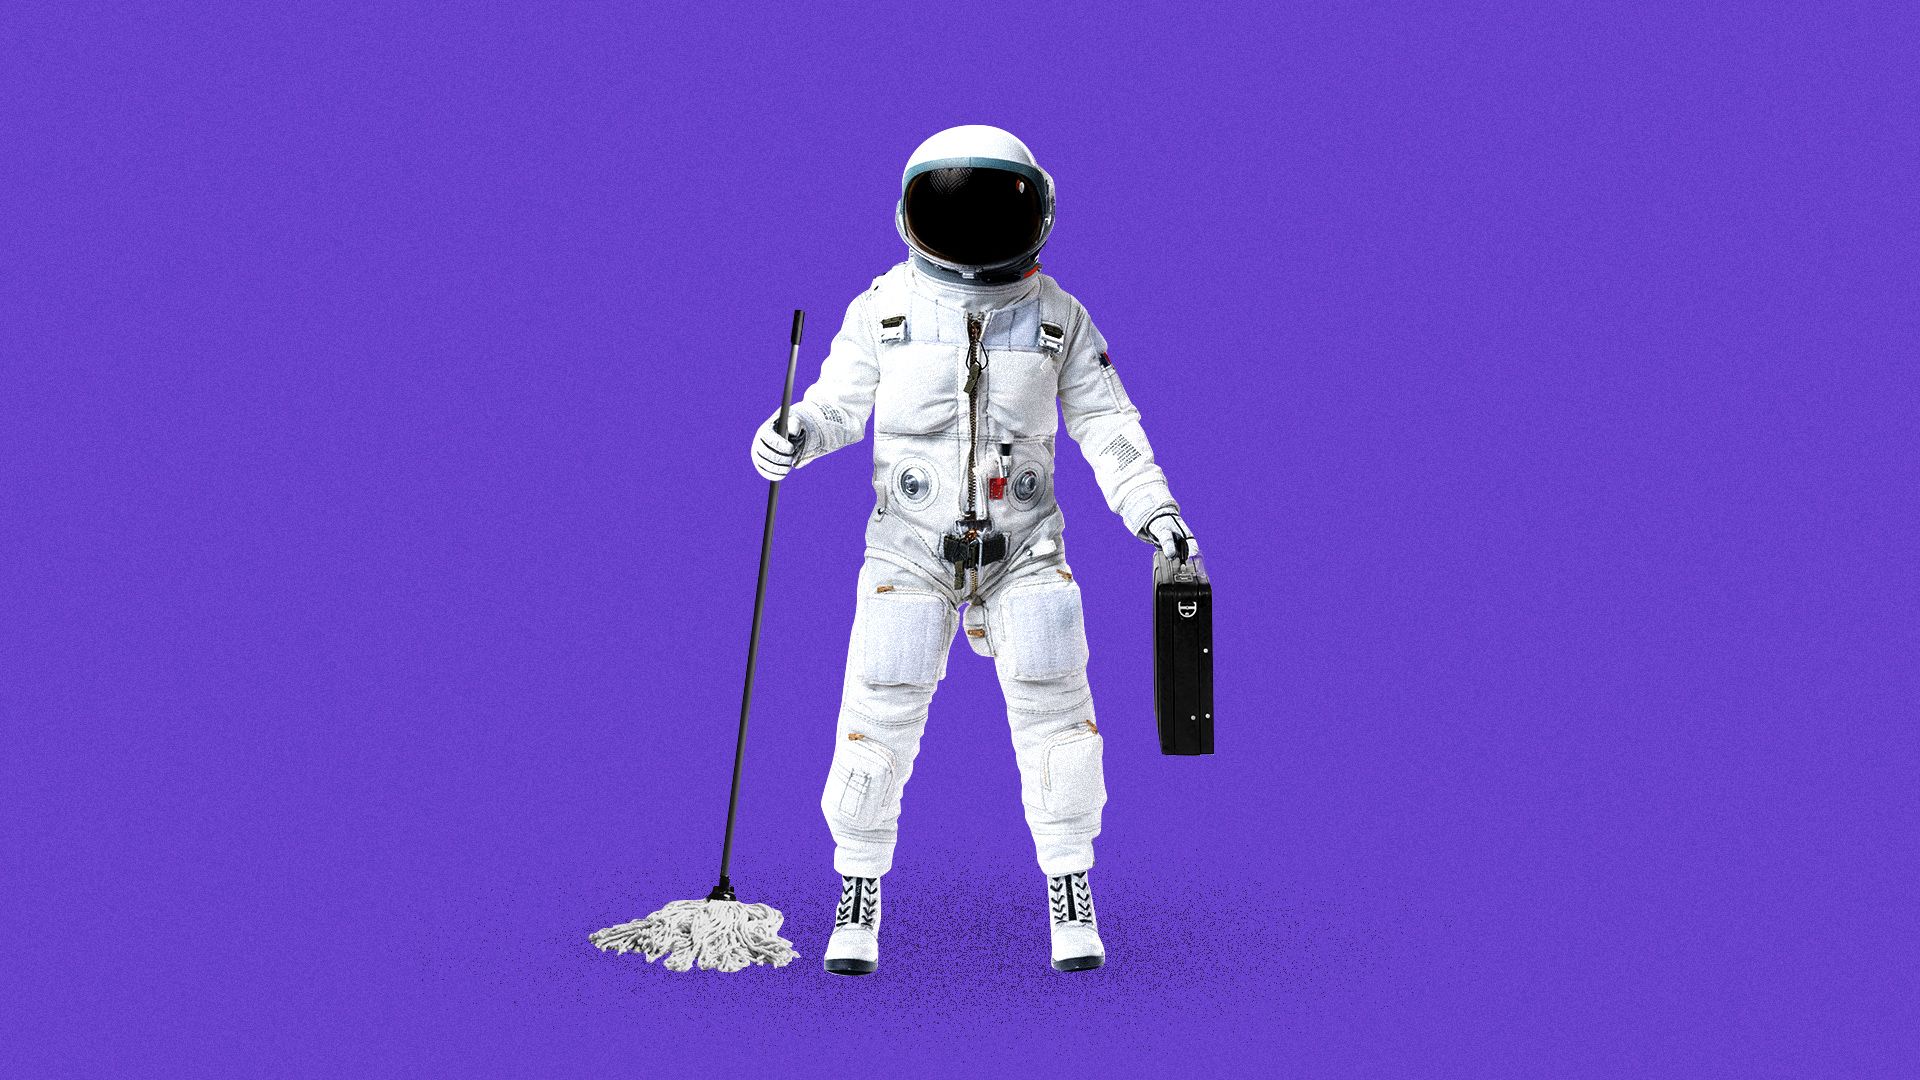 Illustration of a space janitor